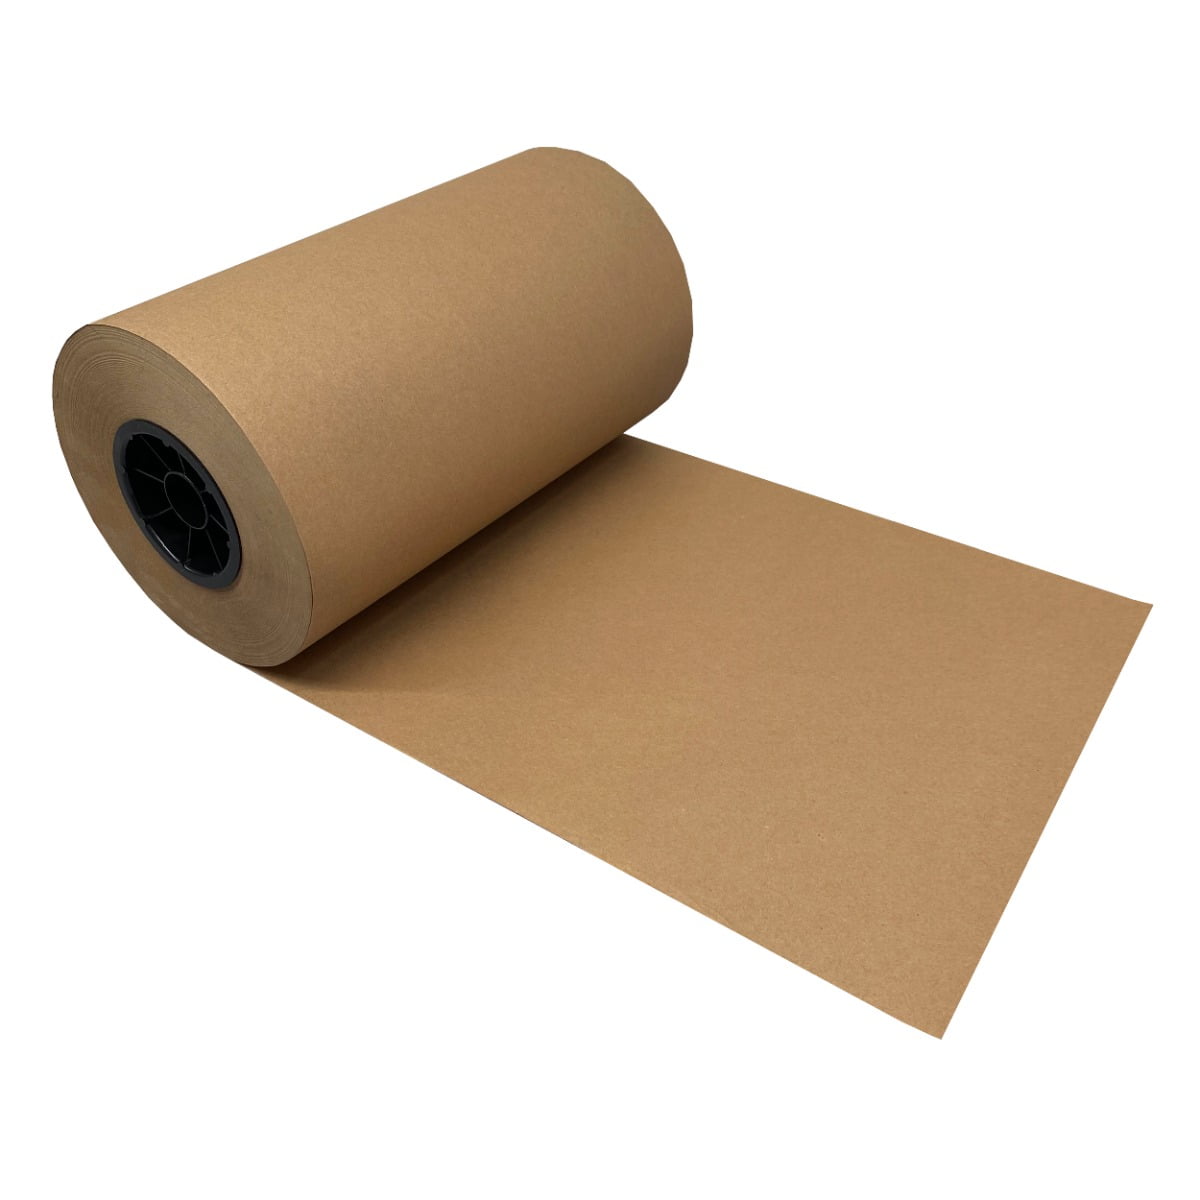 Void Fill Kraft Paper, Ideal for Packing, Case of 250 Ft, 15 x 11, 30#  Brown Paper, Fan-Folded, Compact, Eco-Friendly 15 x 3,000